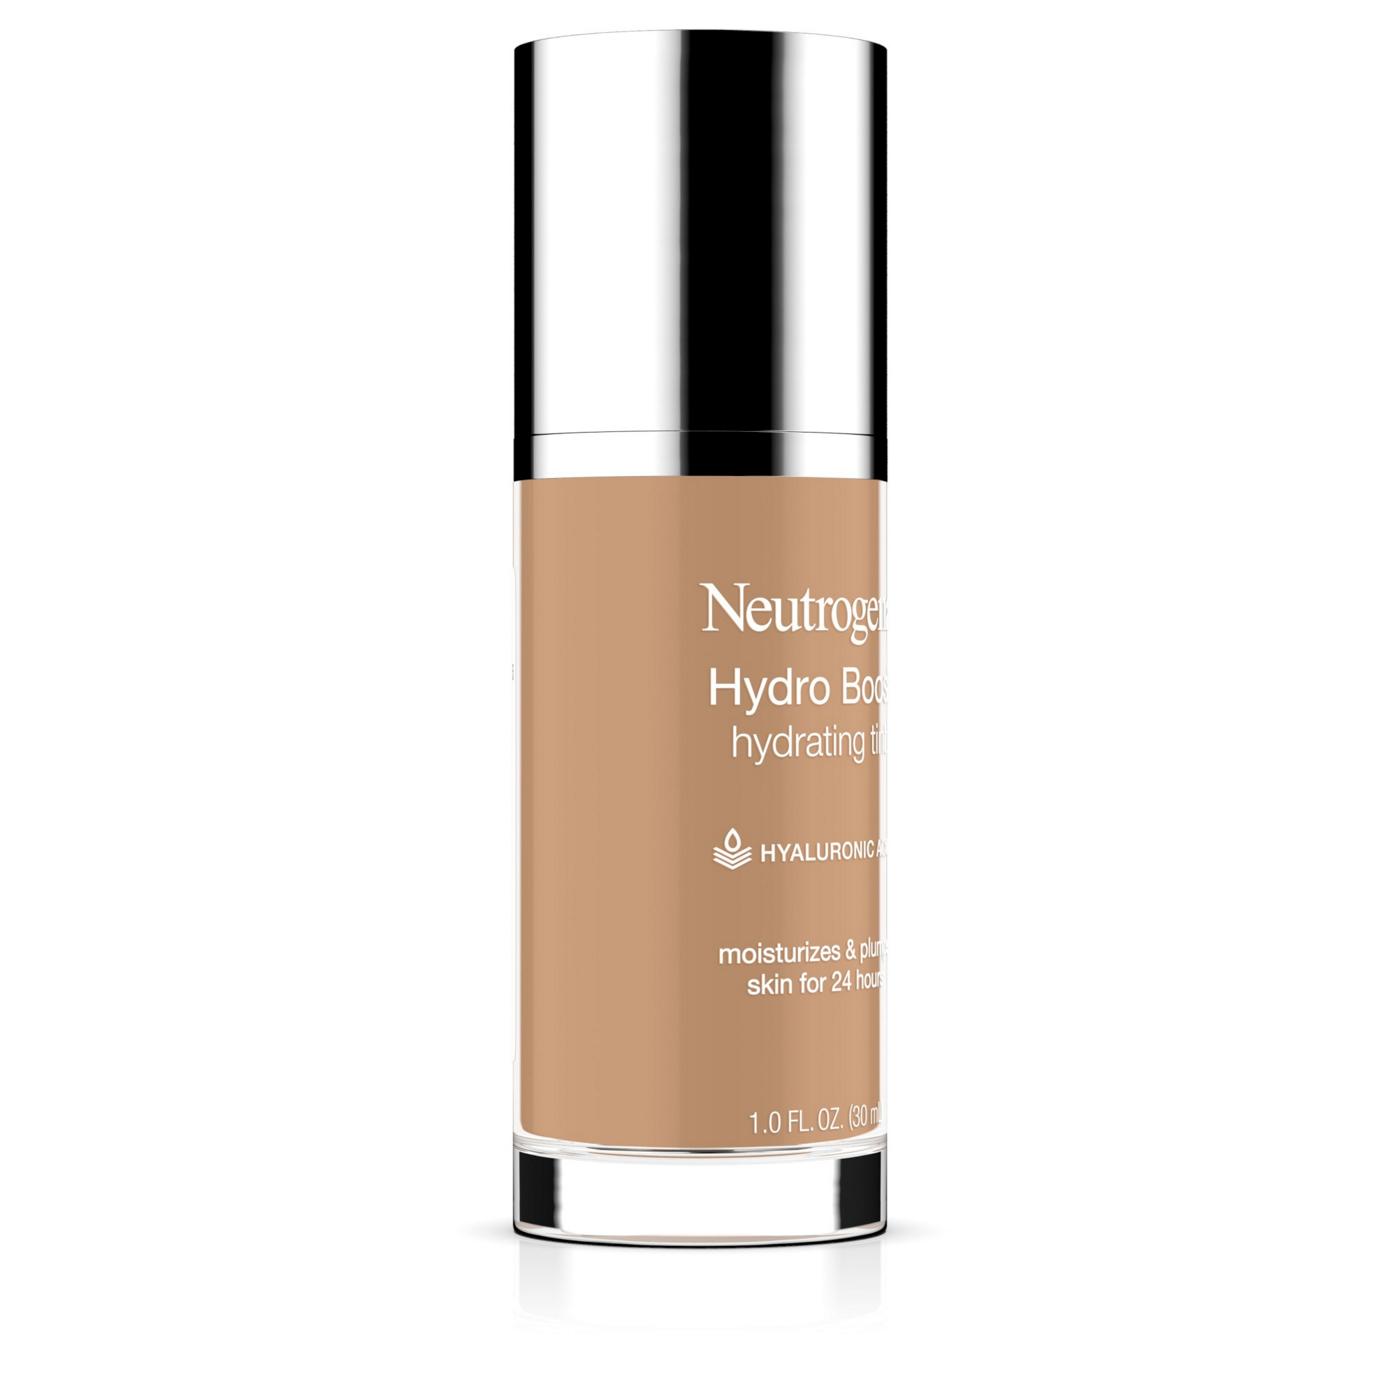 Neutrogena Hydro Boost Hydrating Tint 60 Natural Beige; image 3 of 6